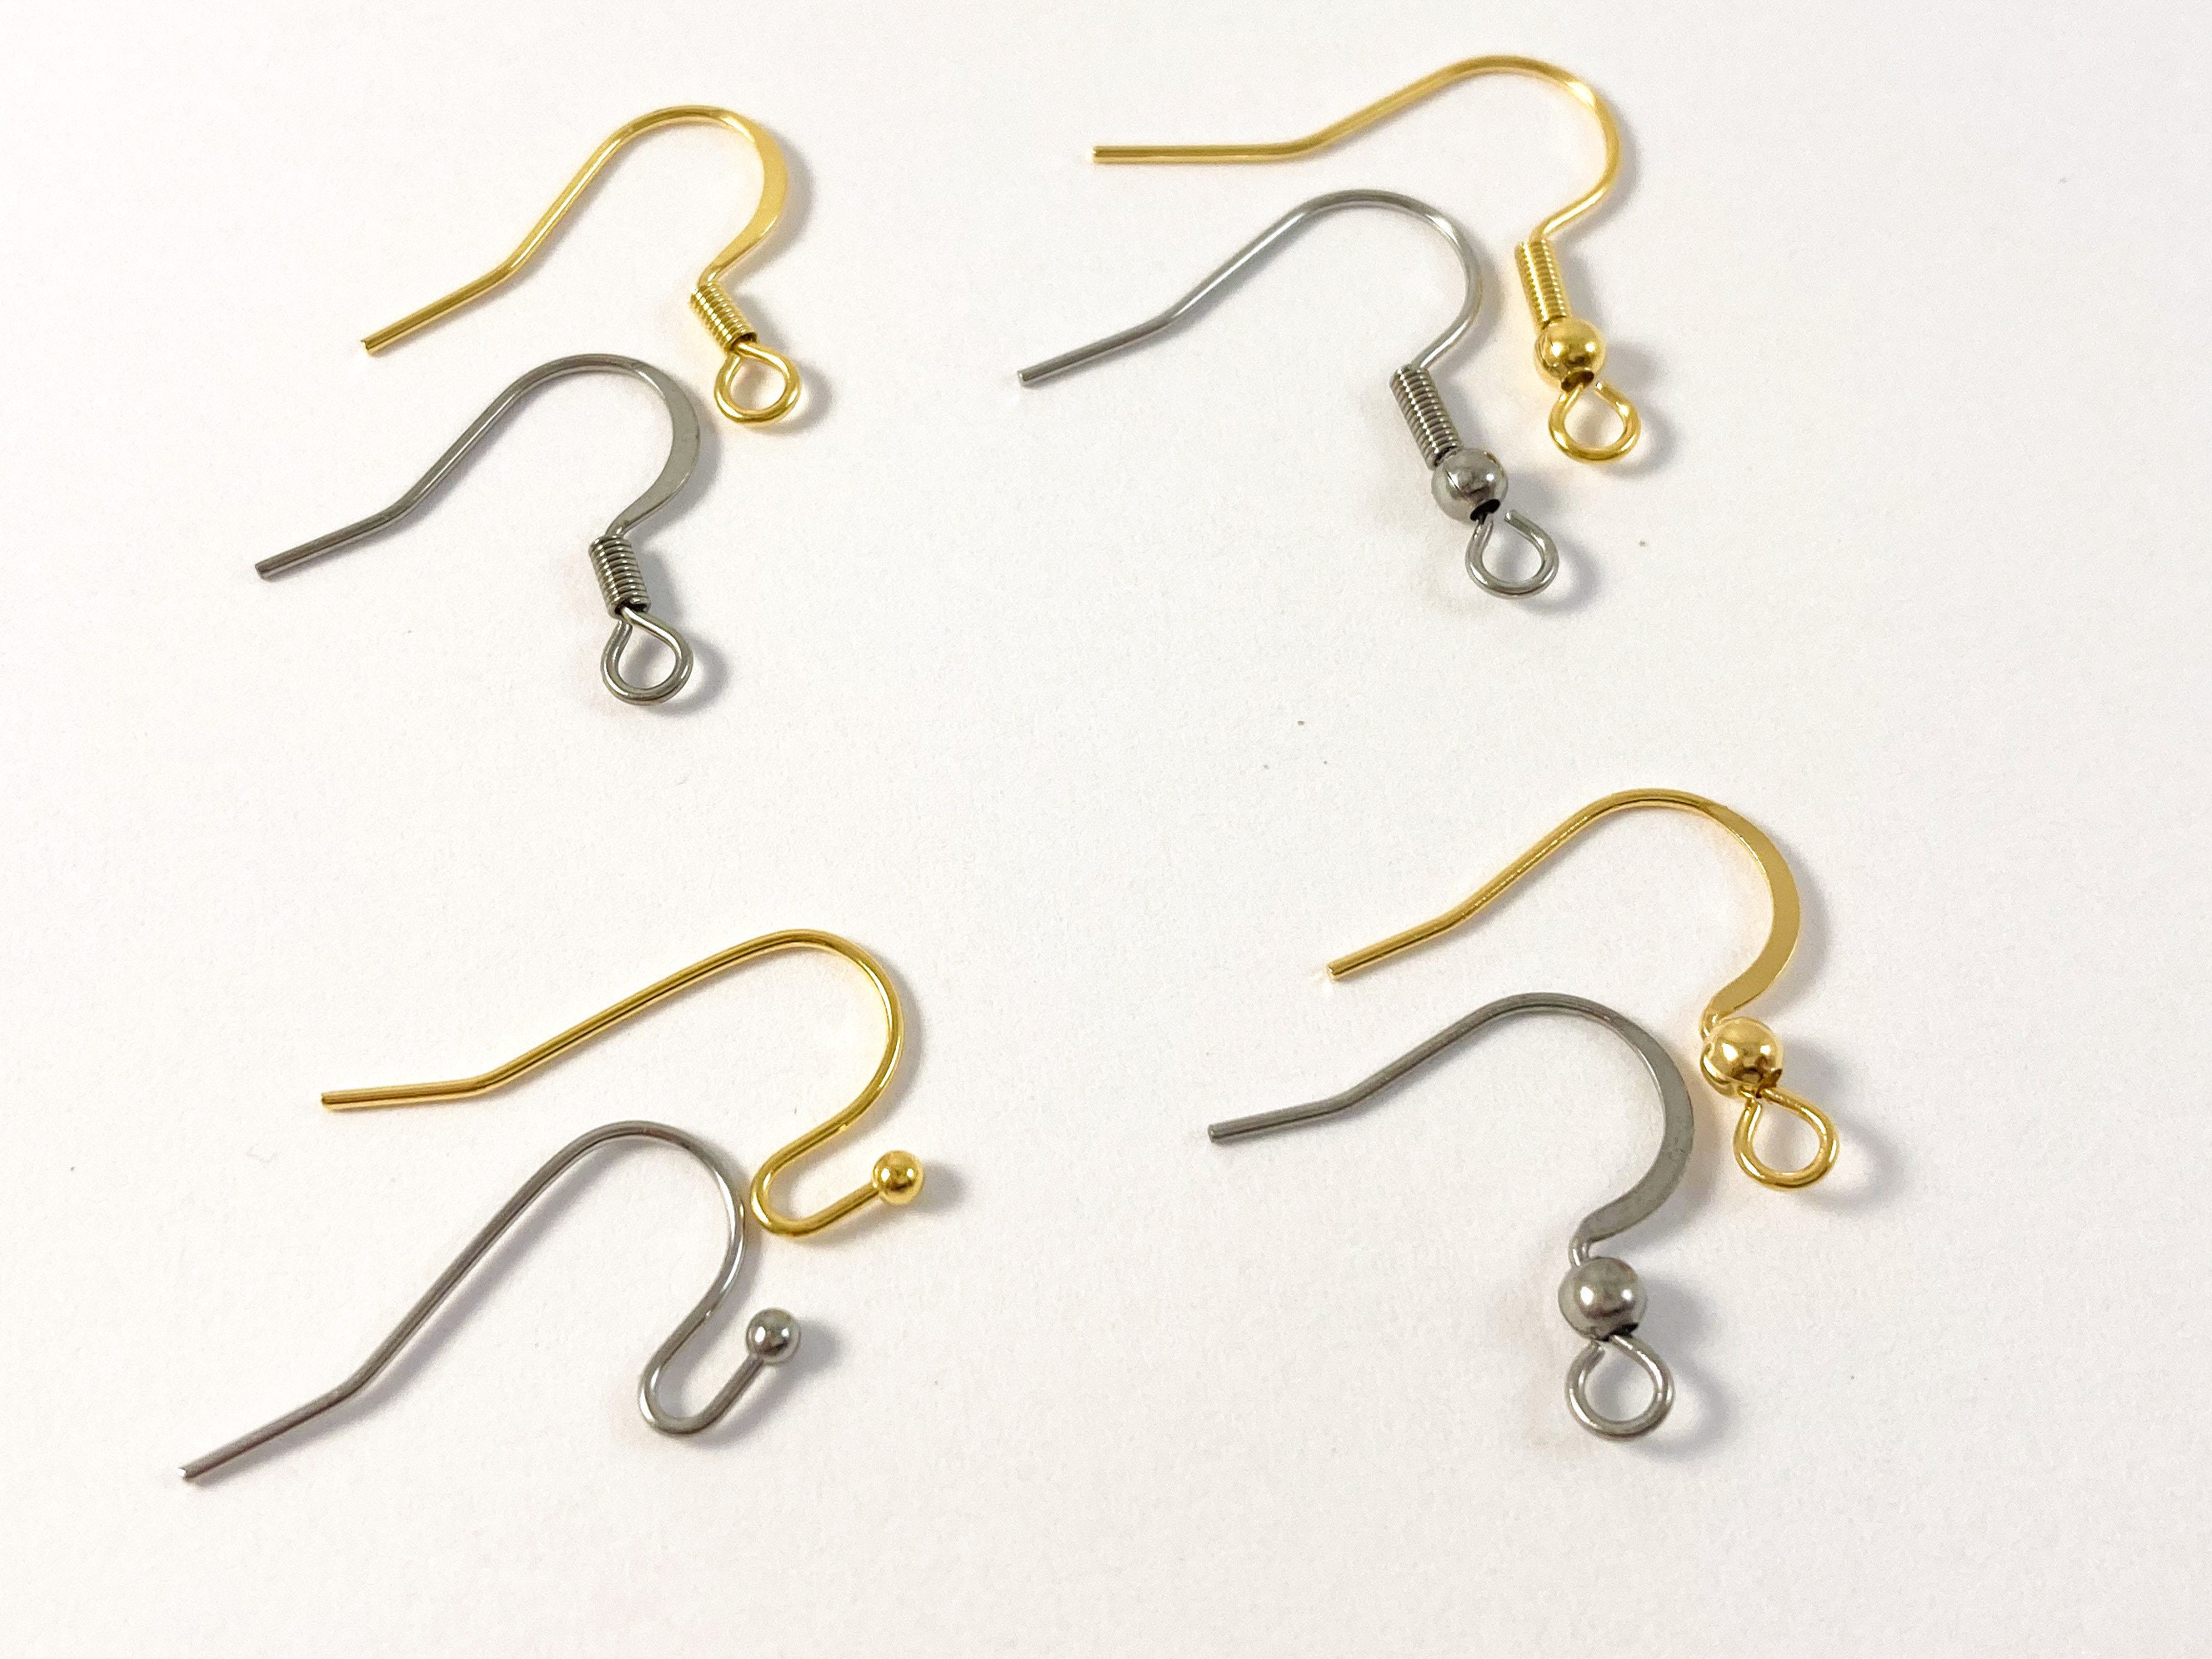 Cheriswelry 200pcs Earring Hooks Hypoallergenic French Wire Hooks Fish Hook  Ear Wire Stainless Steel Earrings with Ball and Coil for DIY Earrings